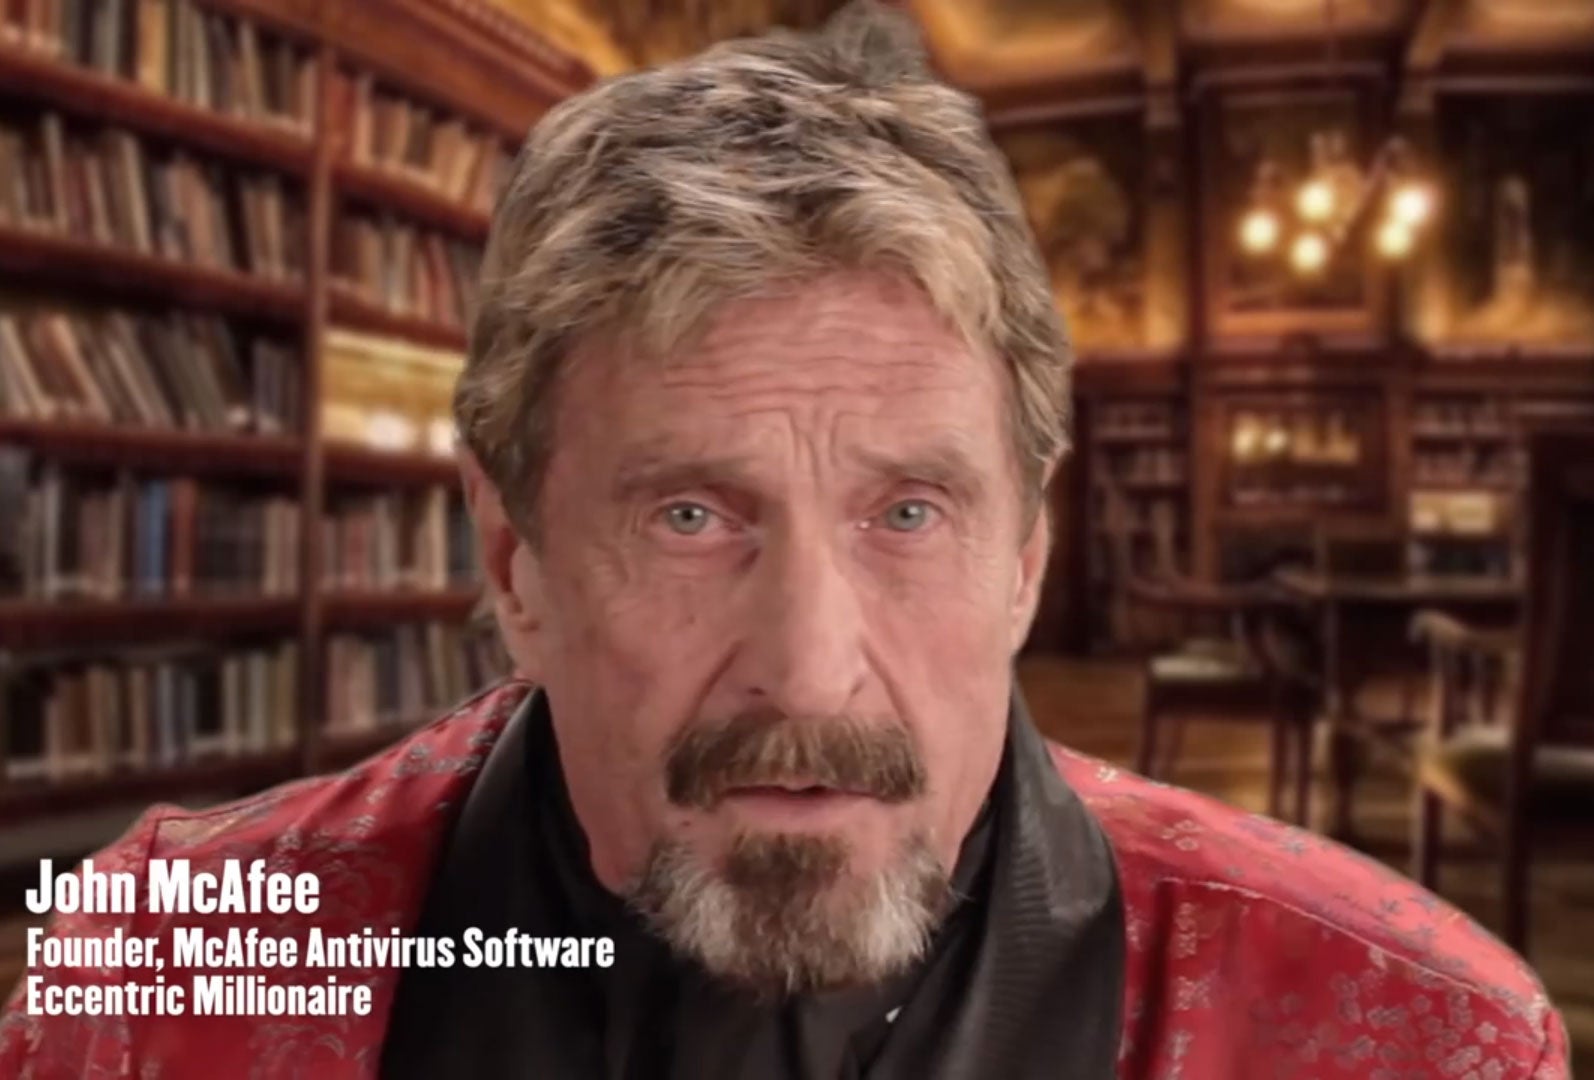 John McAfee as he appears in his video guide to uninstalling his software.